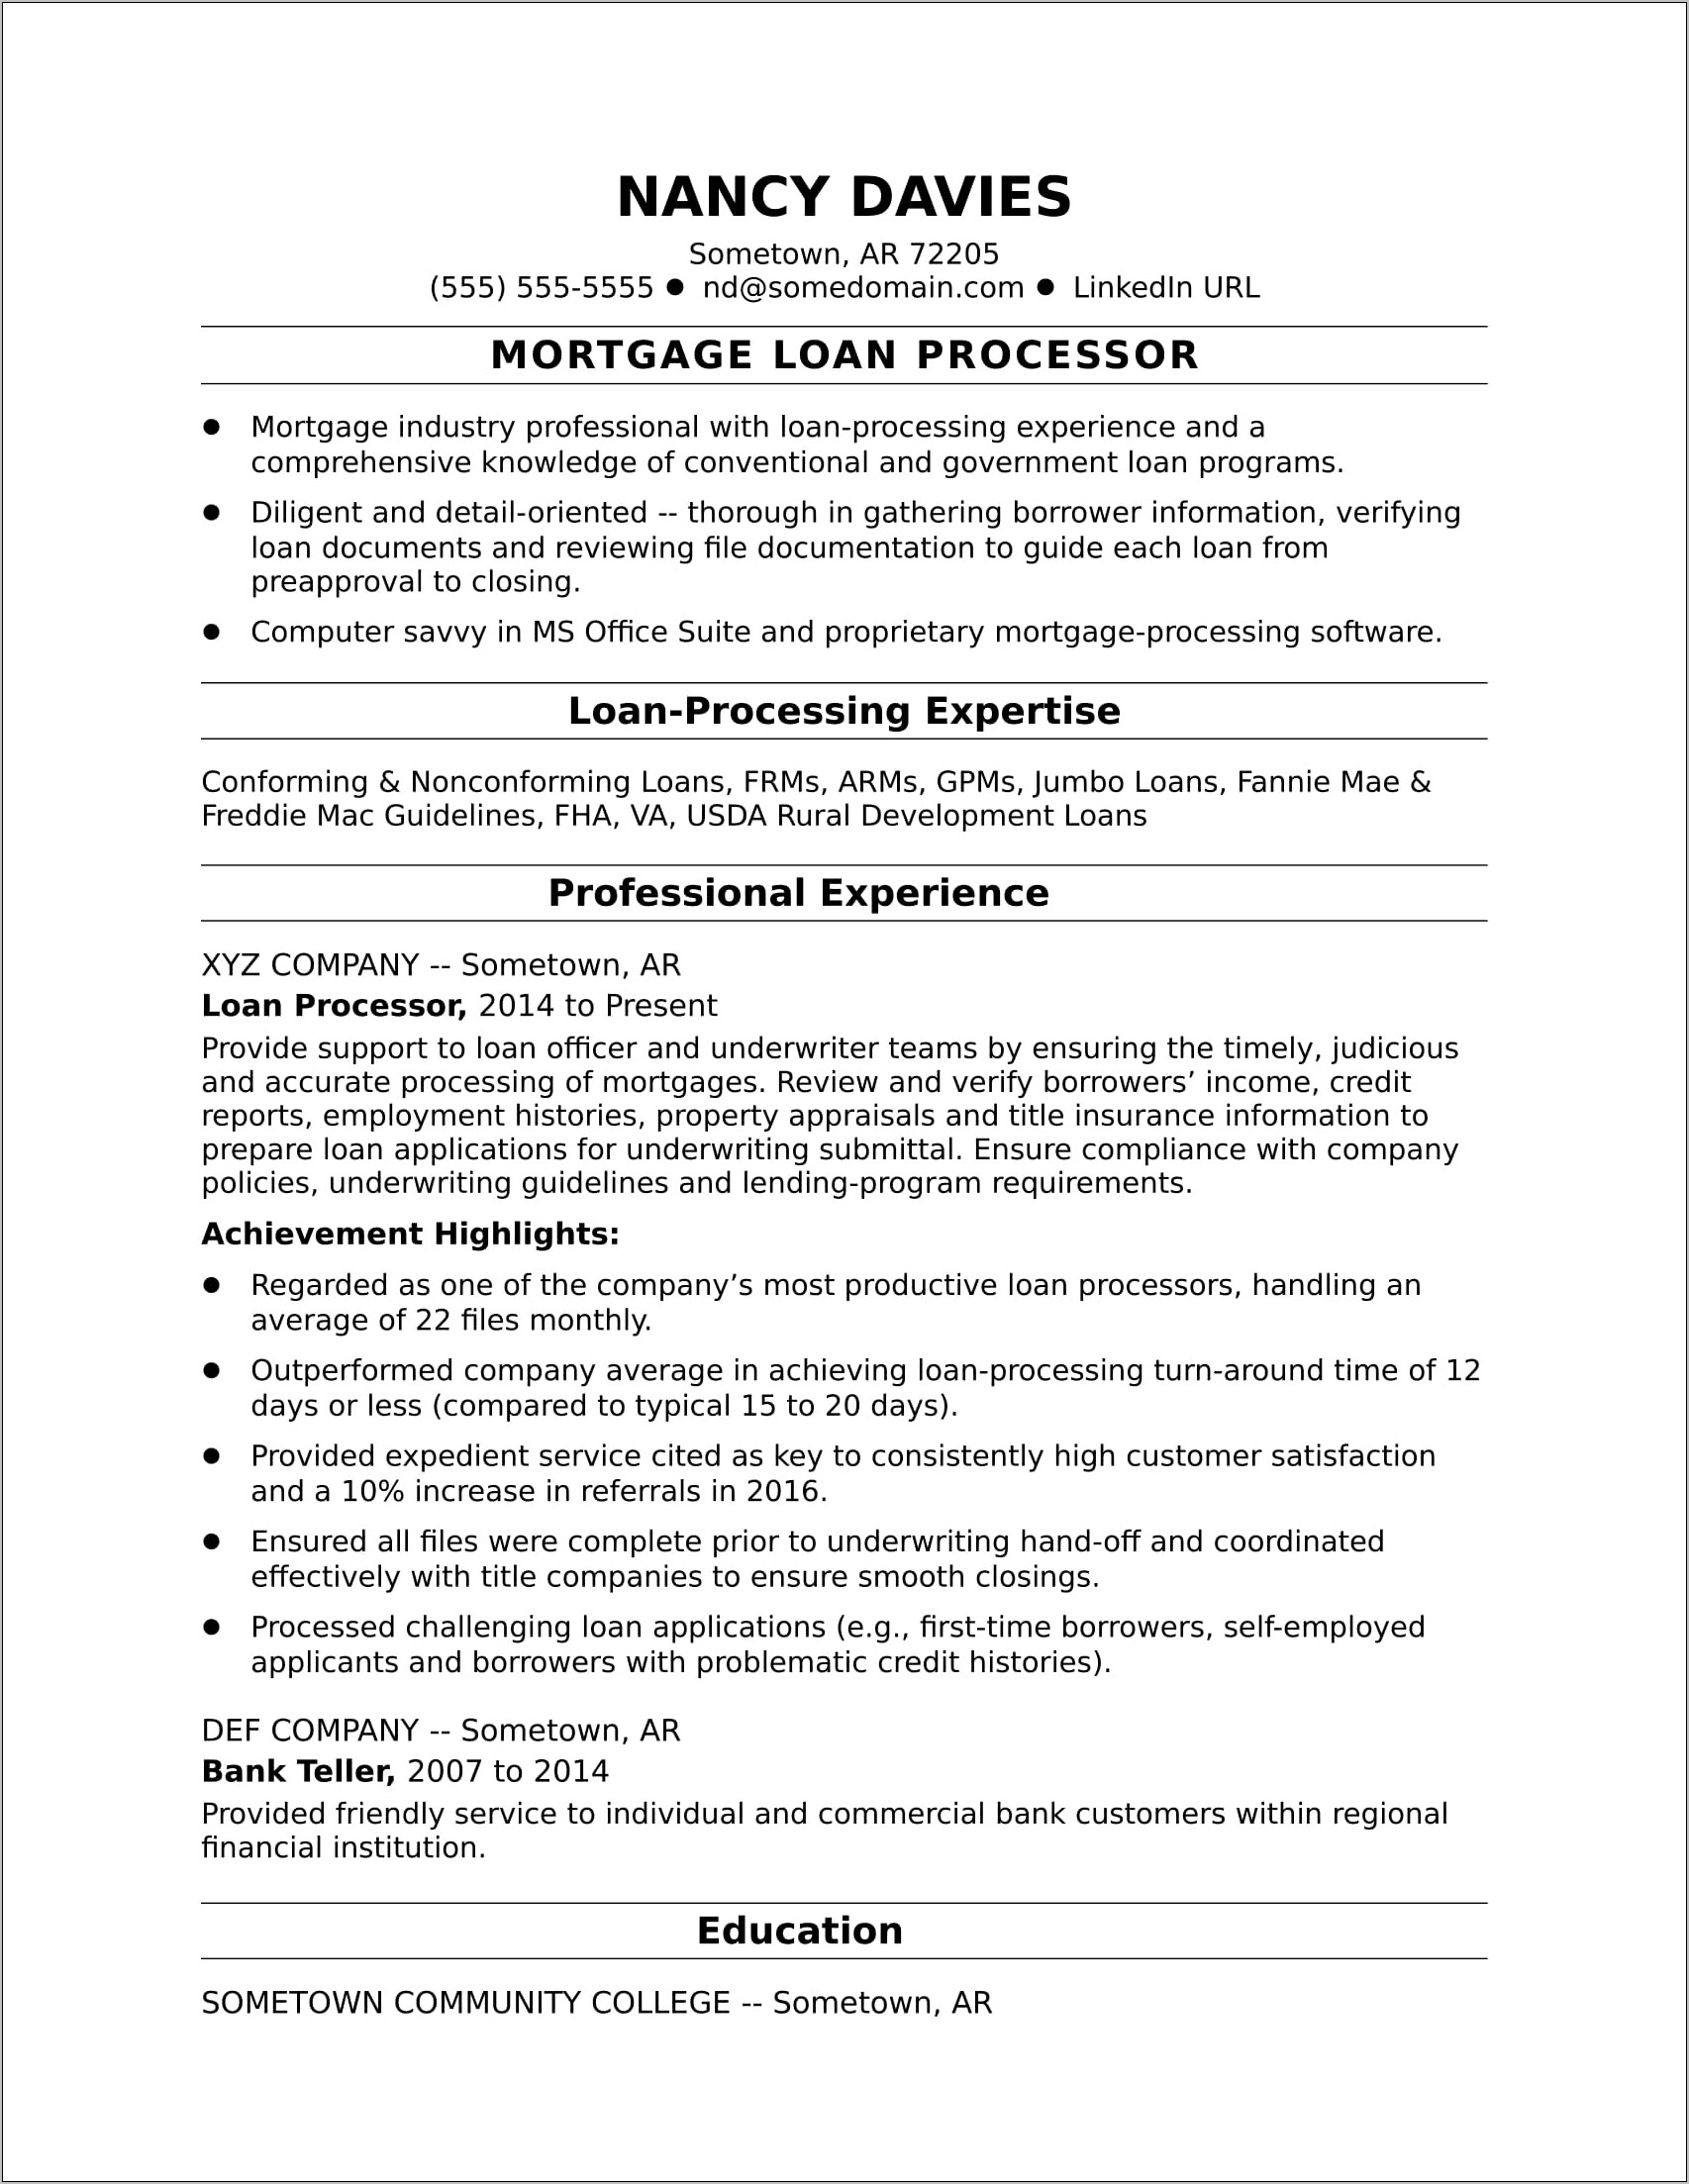 Commercial Banking Unit Manager Sample Resume